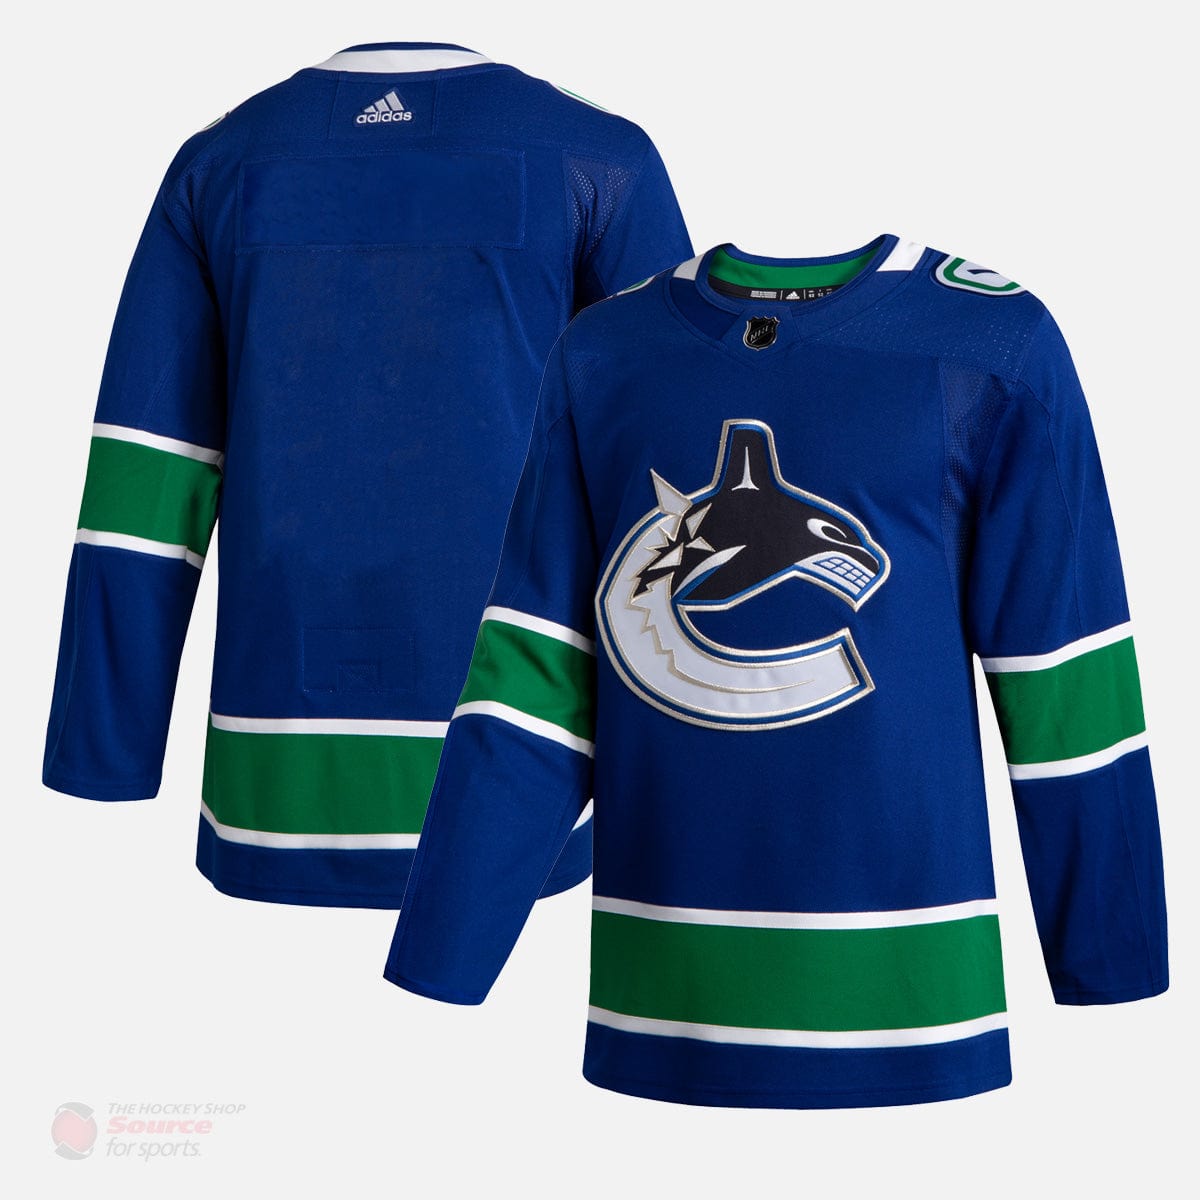 Vancouver Canucks Home Adidas Authentic Senior Jersey